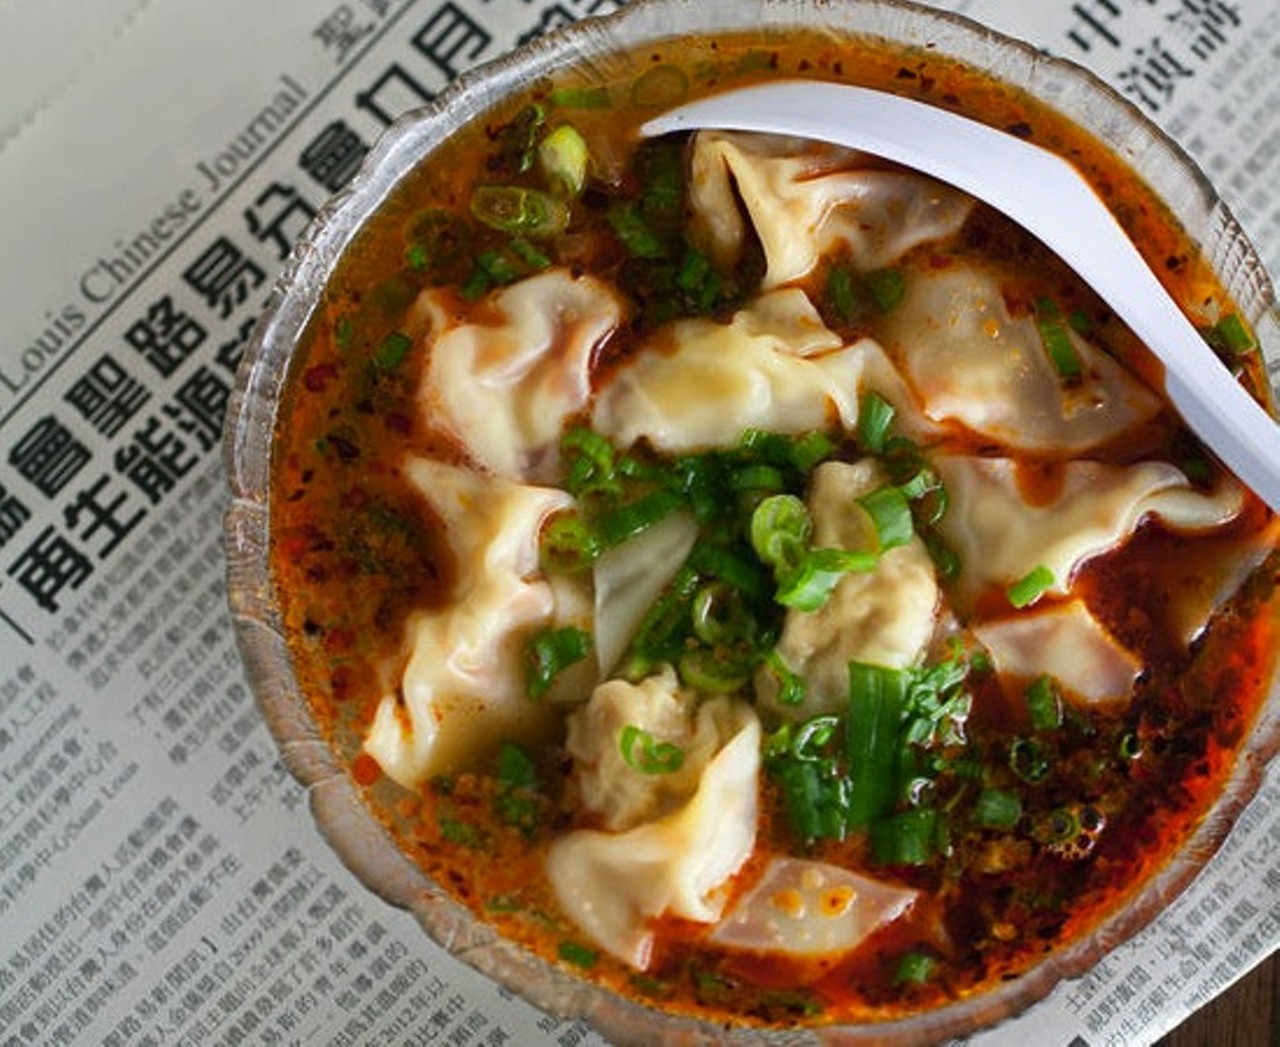 6. "Spicy Wonton Soup" at Famous Szechuan Pavilion
"Spicy Wonton Soup" betrays its chile heat in the vivid orange-red of its broth, in which bob plump little wontons stuffed with ground pork.